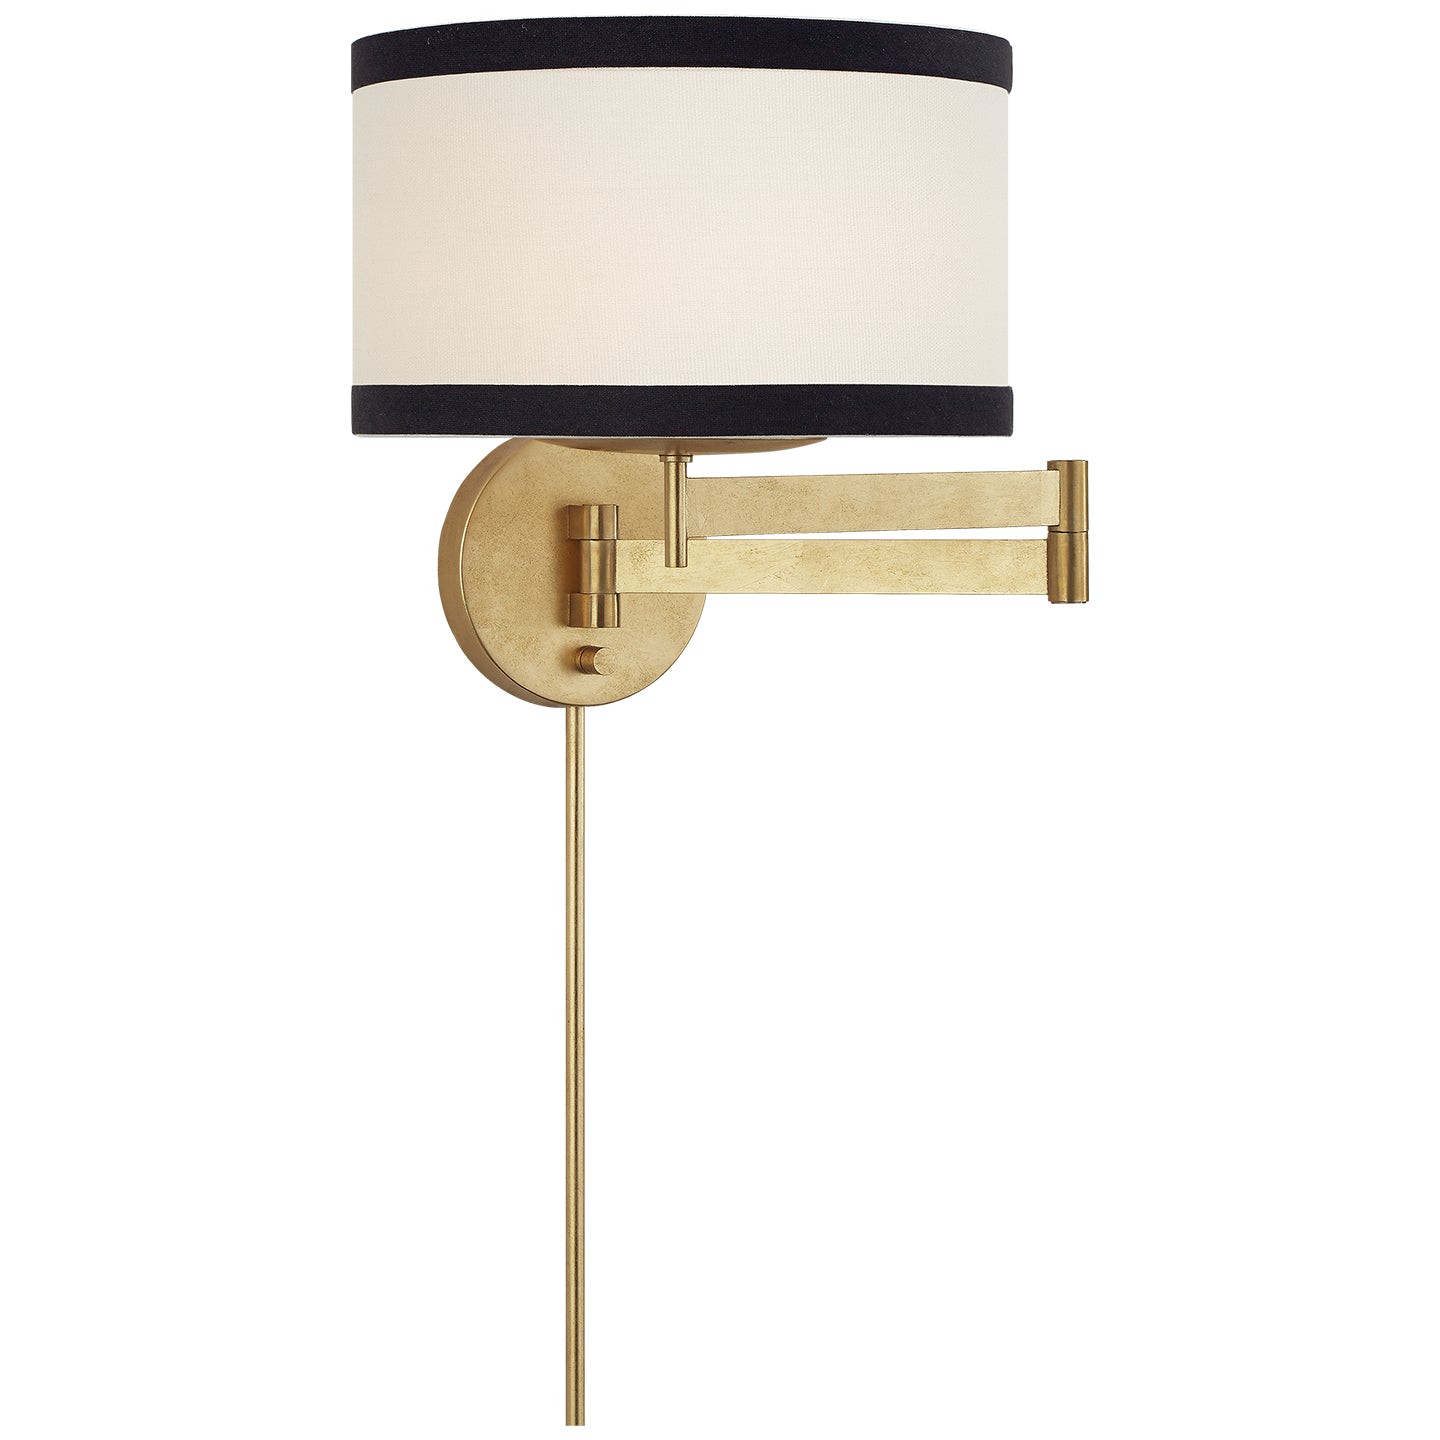 Load image into Gallery viewer, Visual Comfort Signature - KS 2075G-L/BL - One Light Swing Arm Wall Sconce - Walker - Gild
